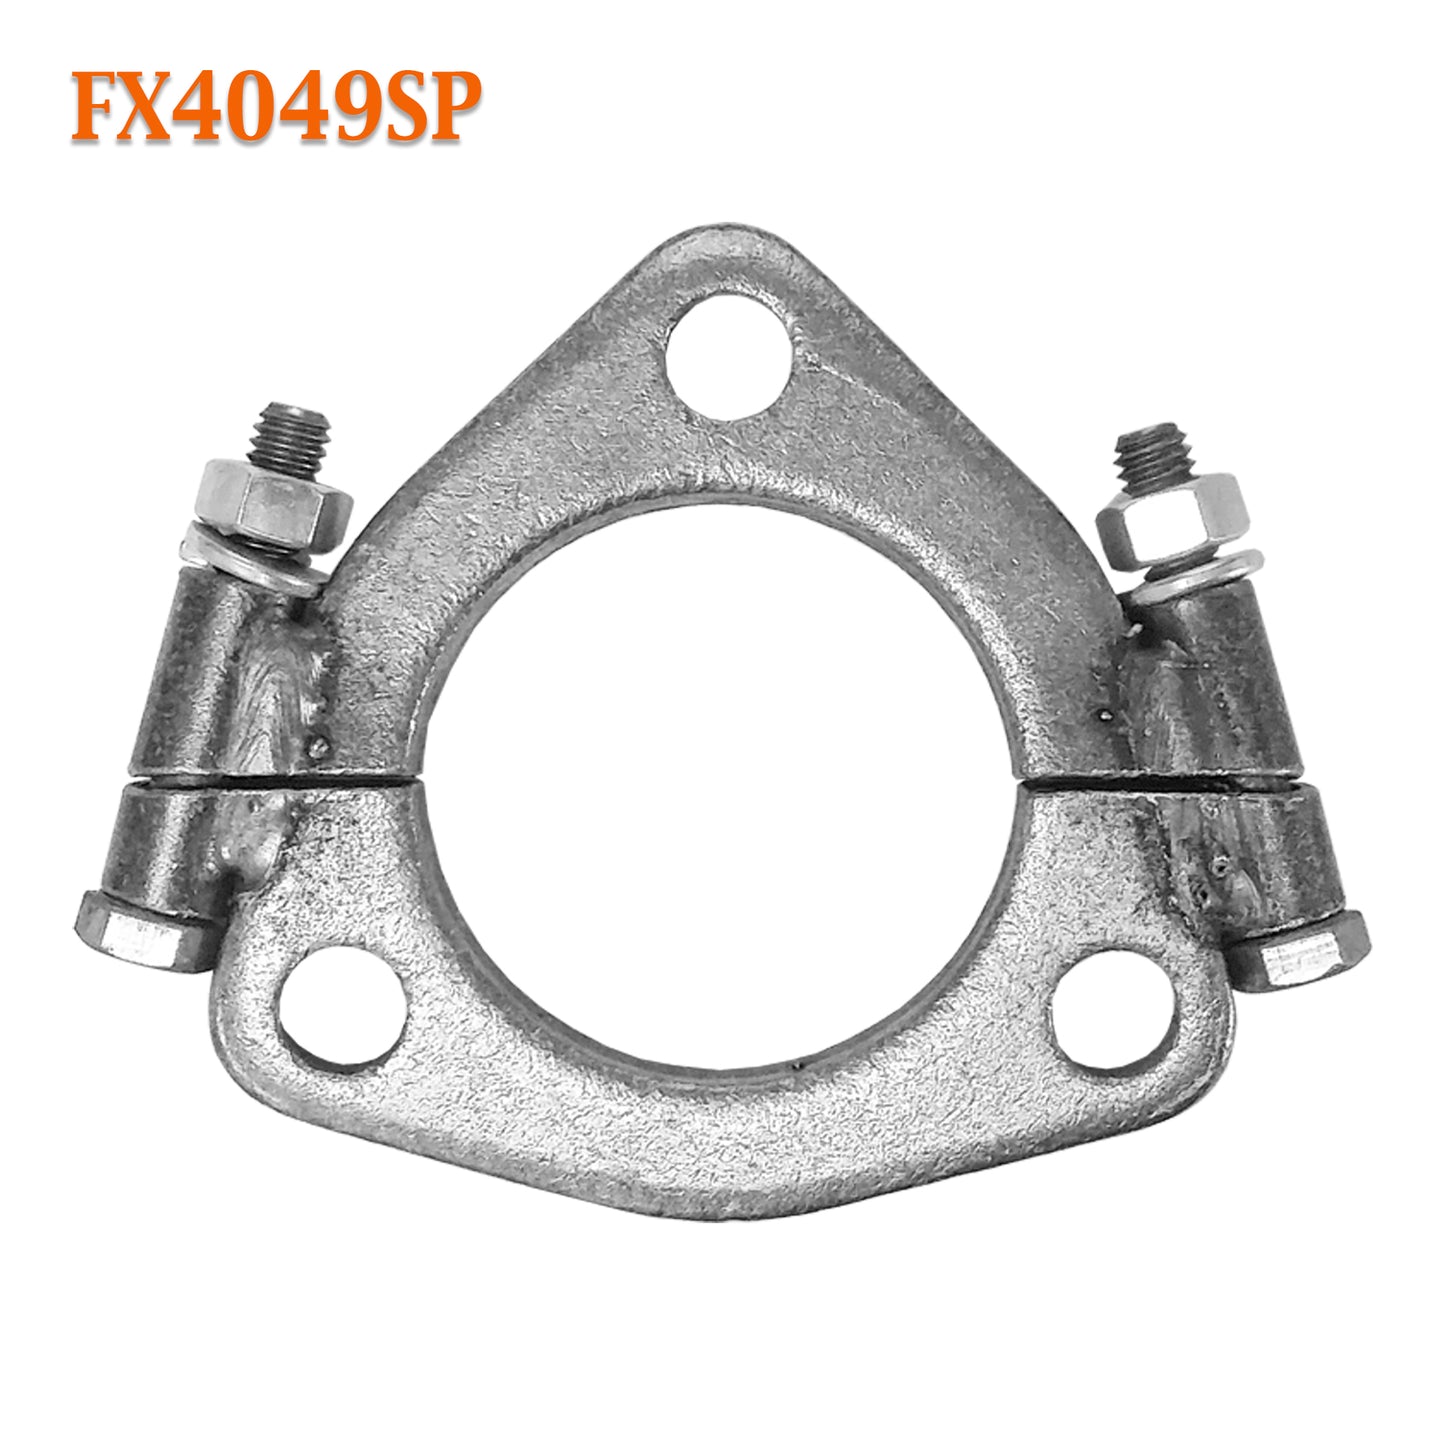 FX4049SP 2 1/4" 2.25" ID Triangle Exhaust Split Flange For 2" OD Flared Y Pipe